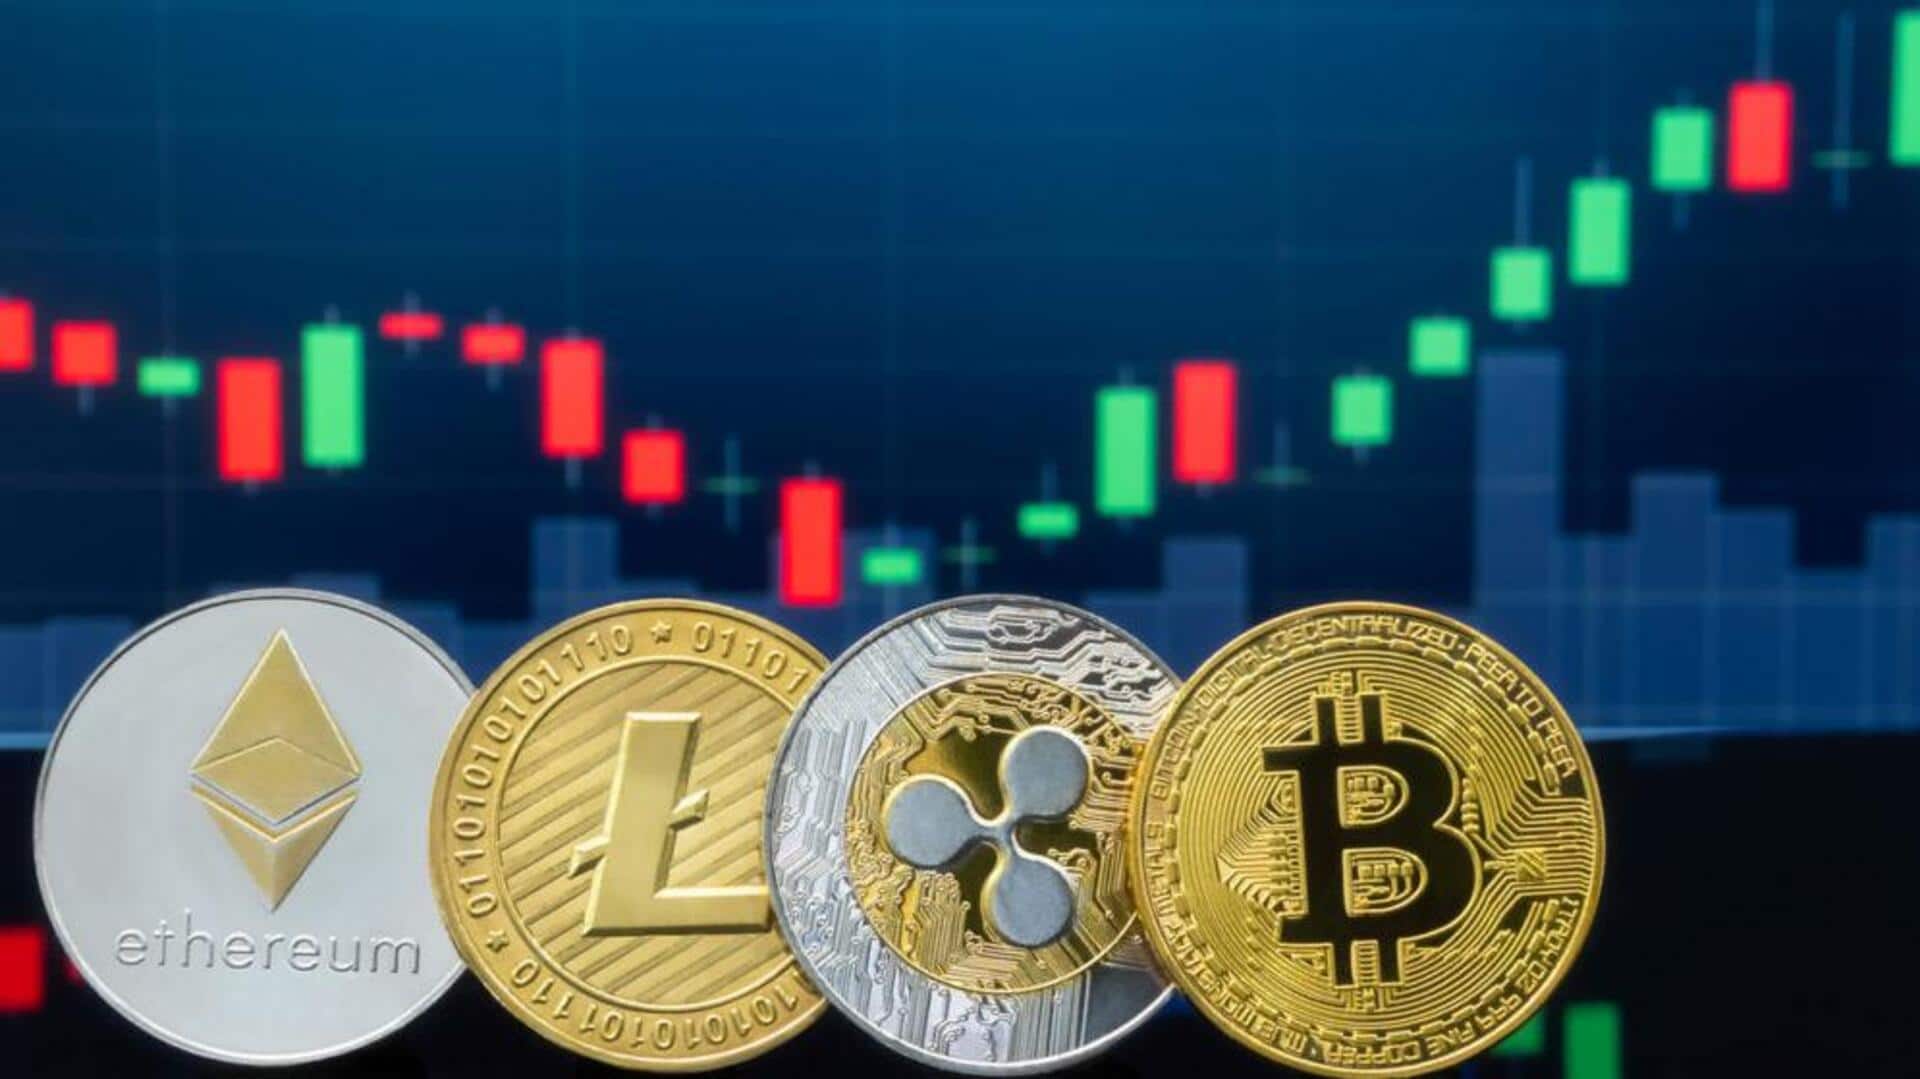 Cryptocurrency prices: Here are rates of Bitcoin, Ethereum, BNB, Solana